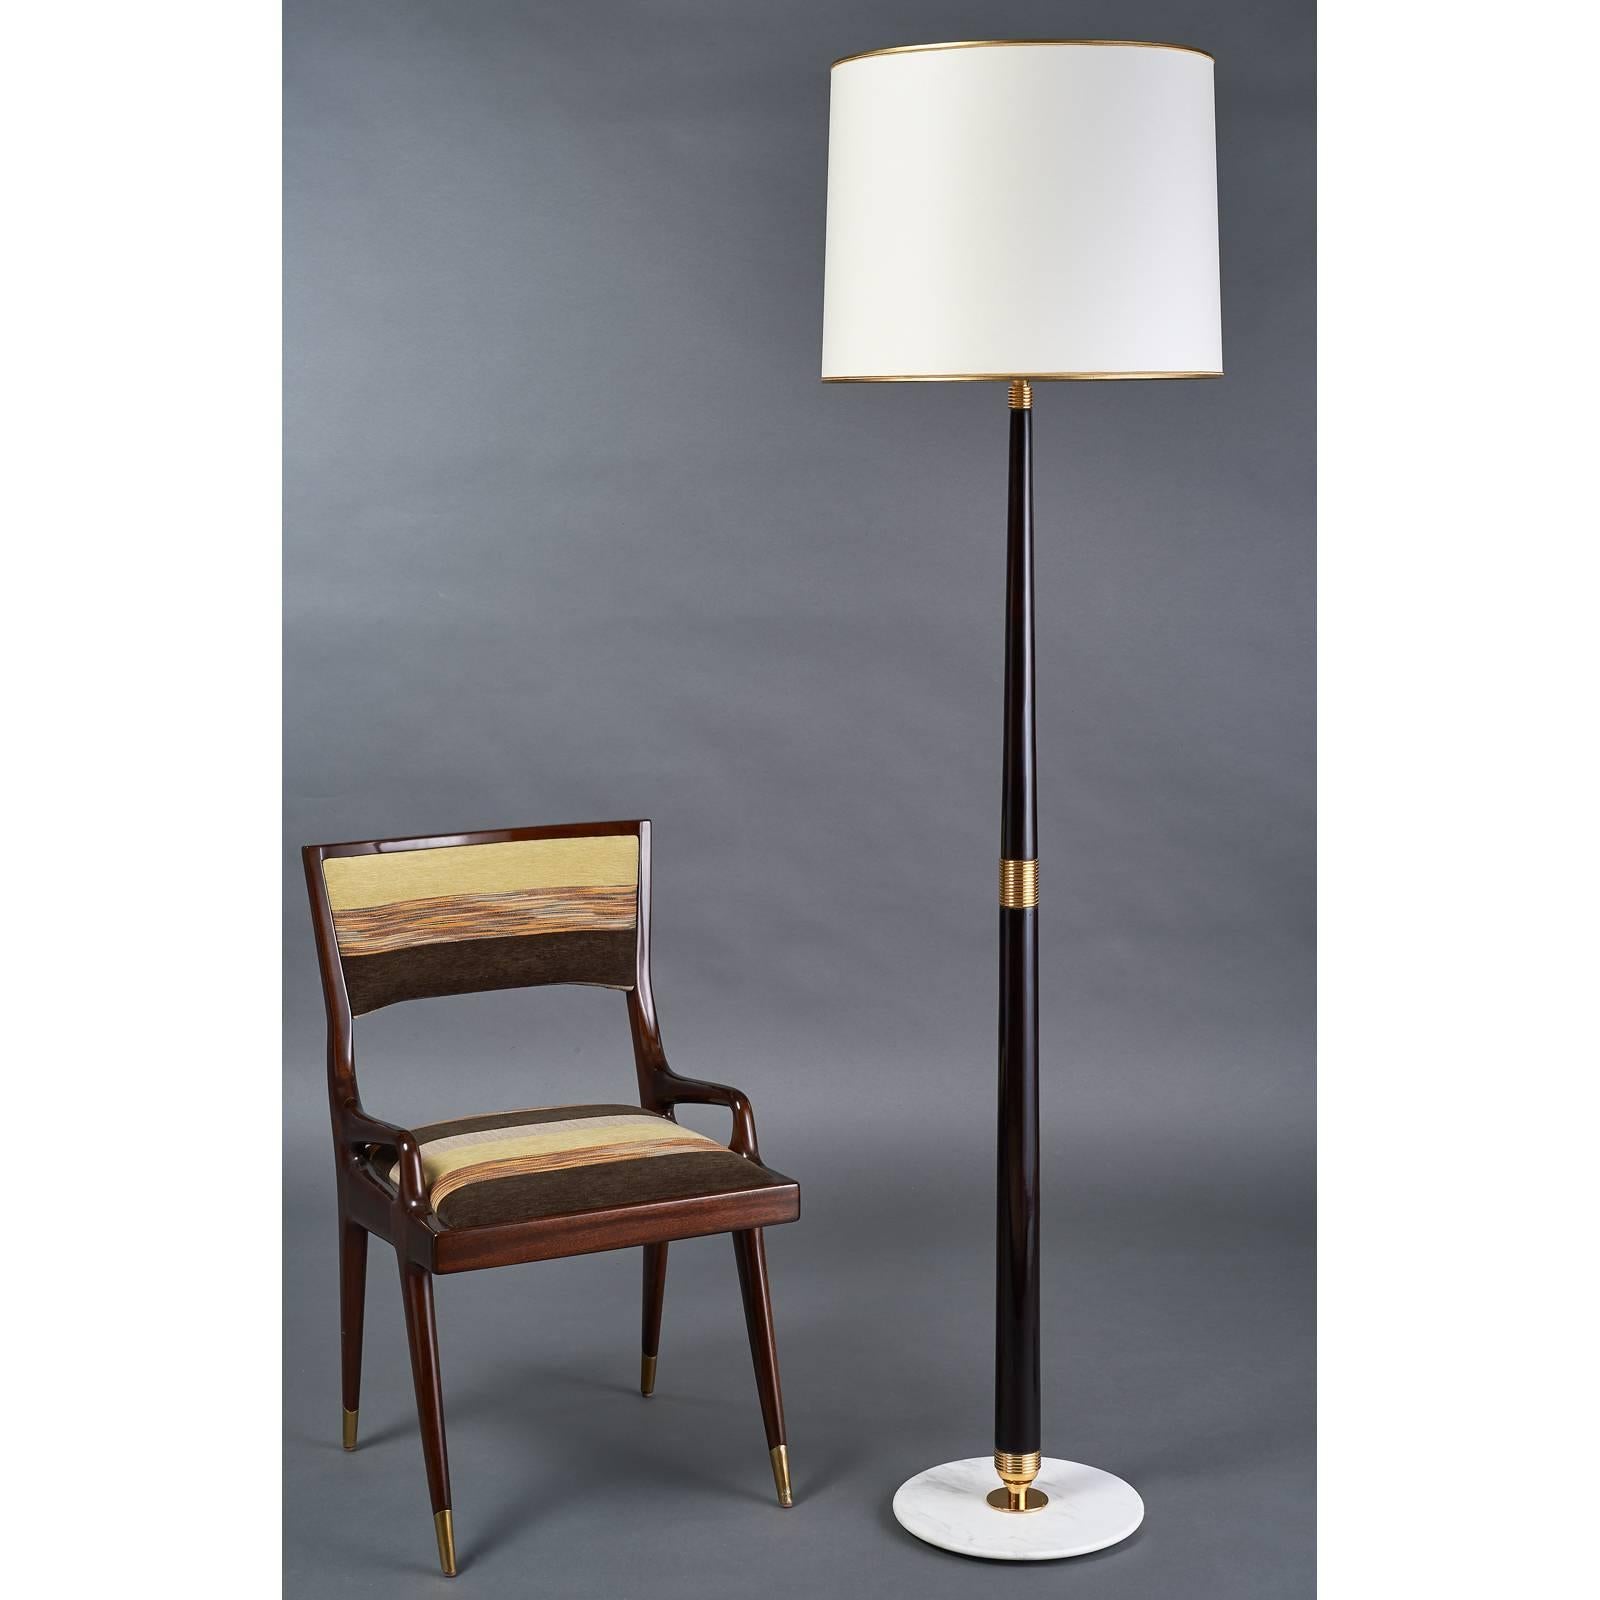 Elegant polished mahogany stained wood floor lamp in the manner of Stilnovo,
with tapering shaft and polished ribbed brass mounts,
beveled marble base. Italy, 1950s
Measures: 70 H x 18.5 diameter
Rewired for use in the USA with three standard base